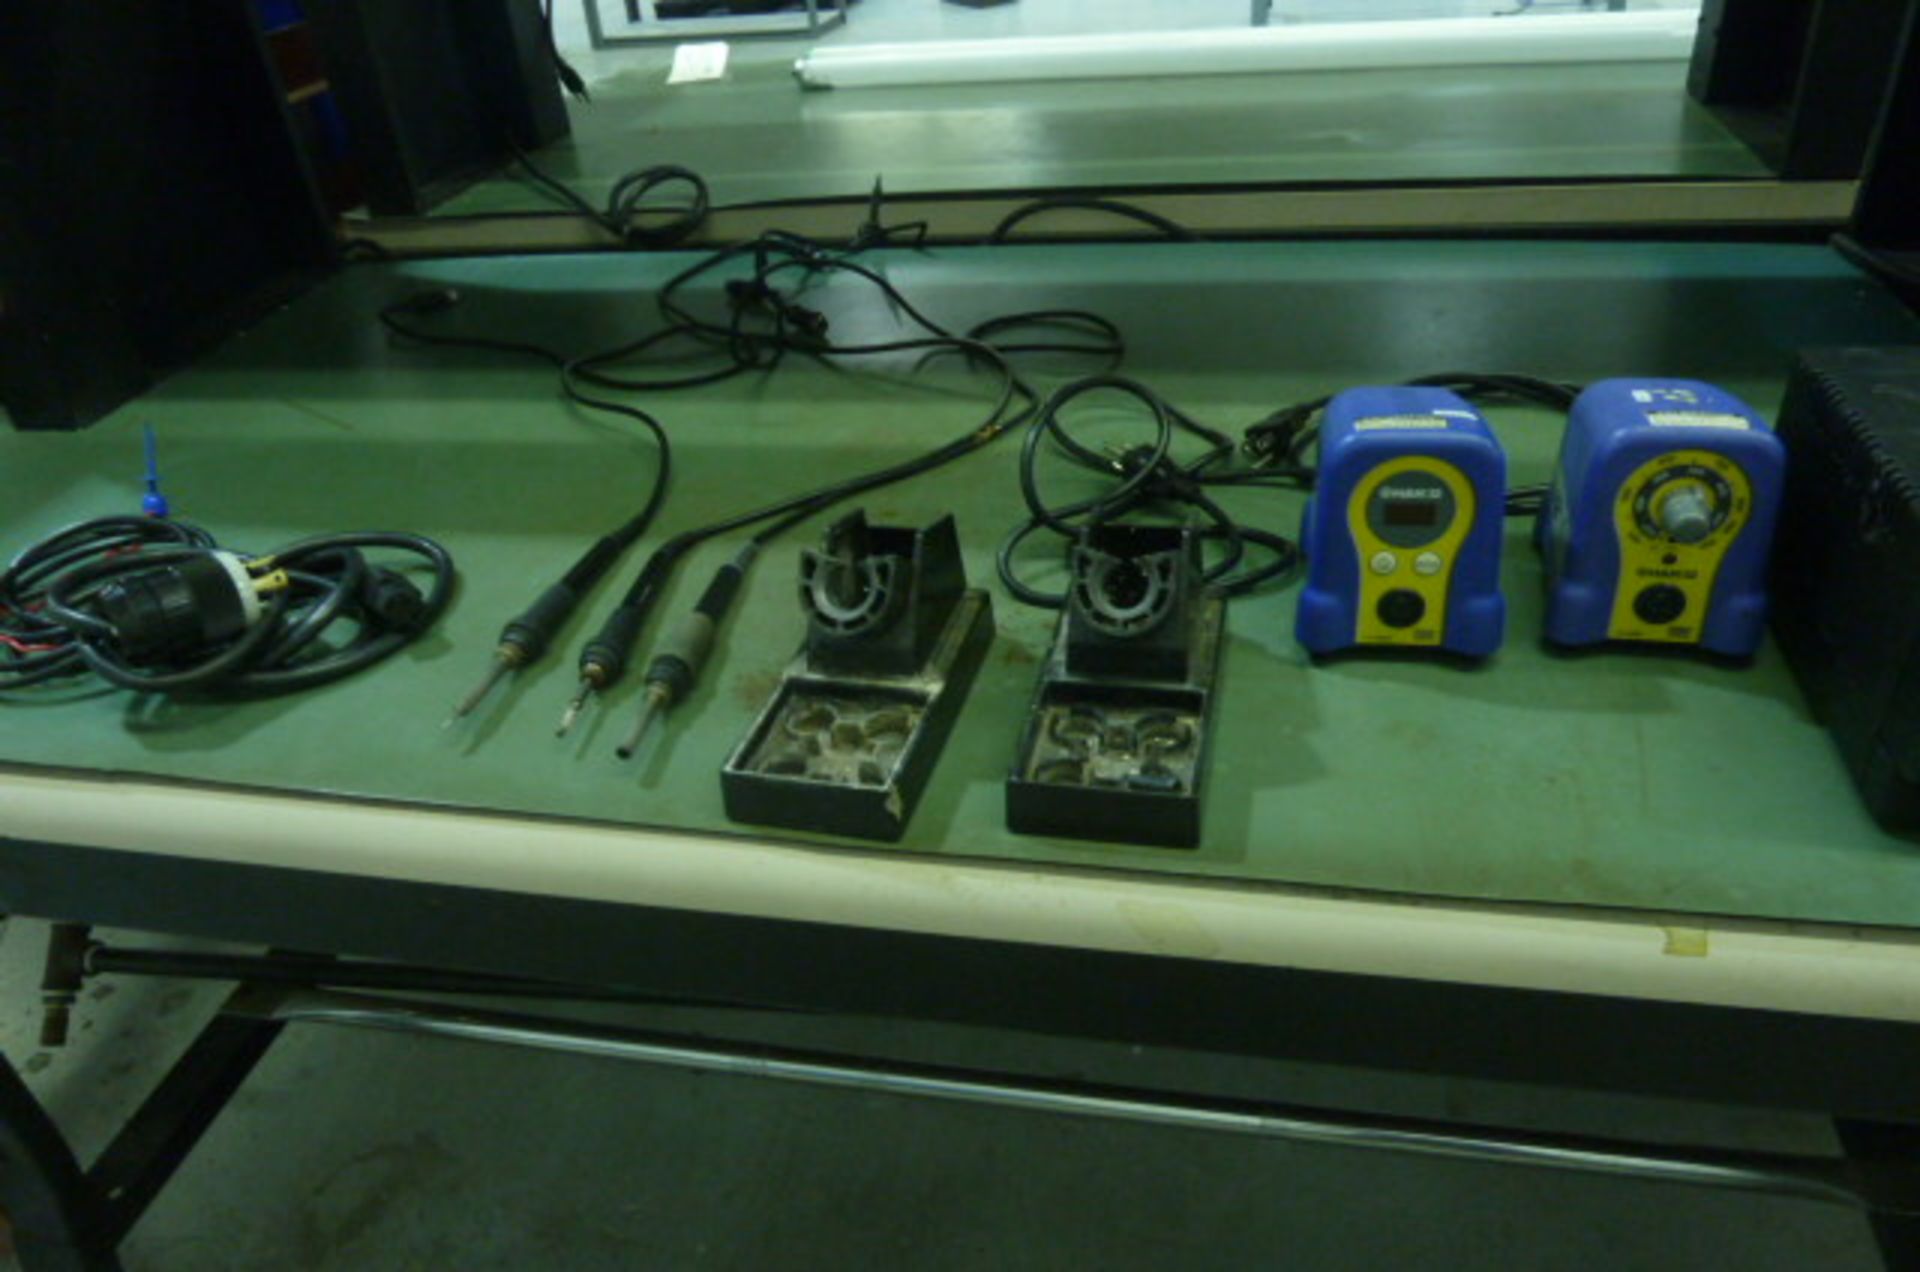 Two Aoyue's, 2) Hakko's, and 3) stencil holders